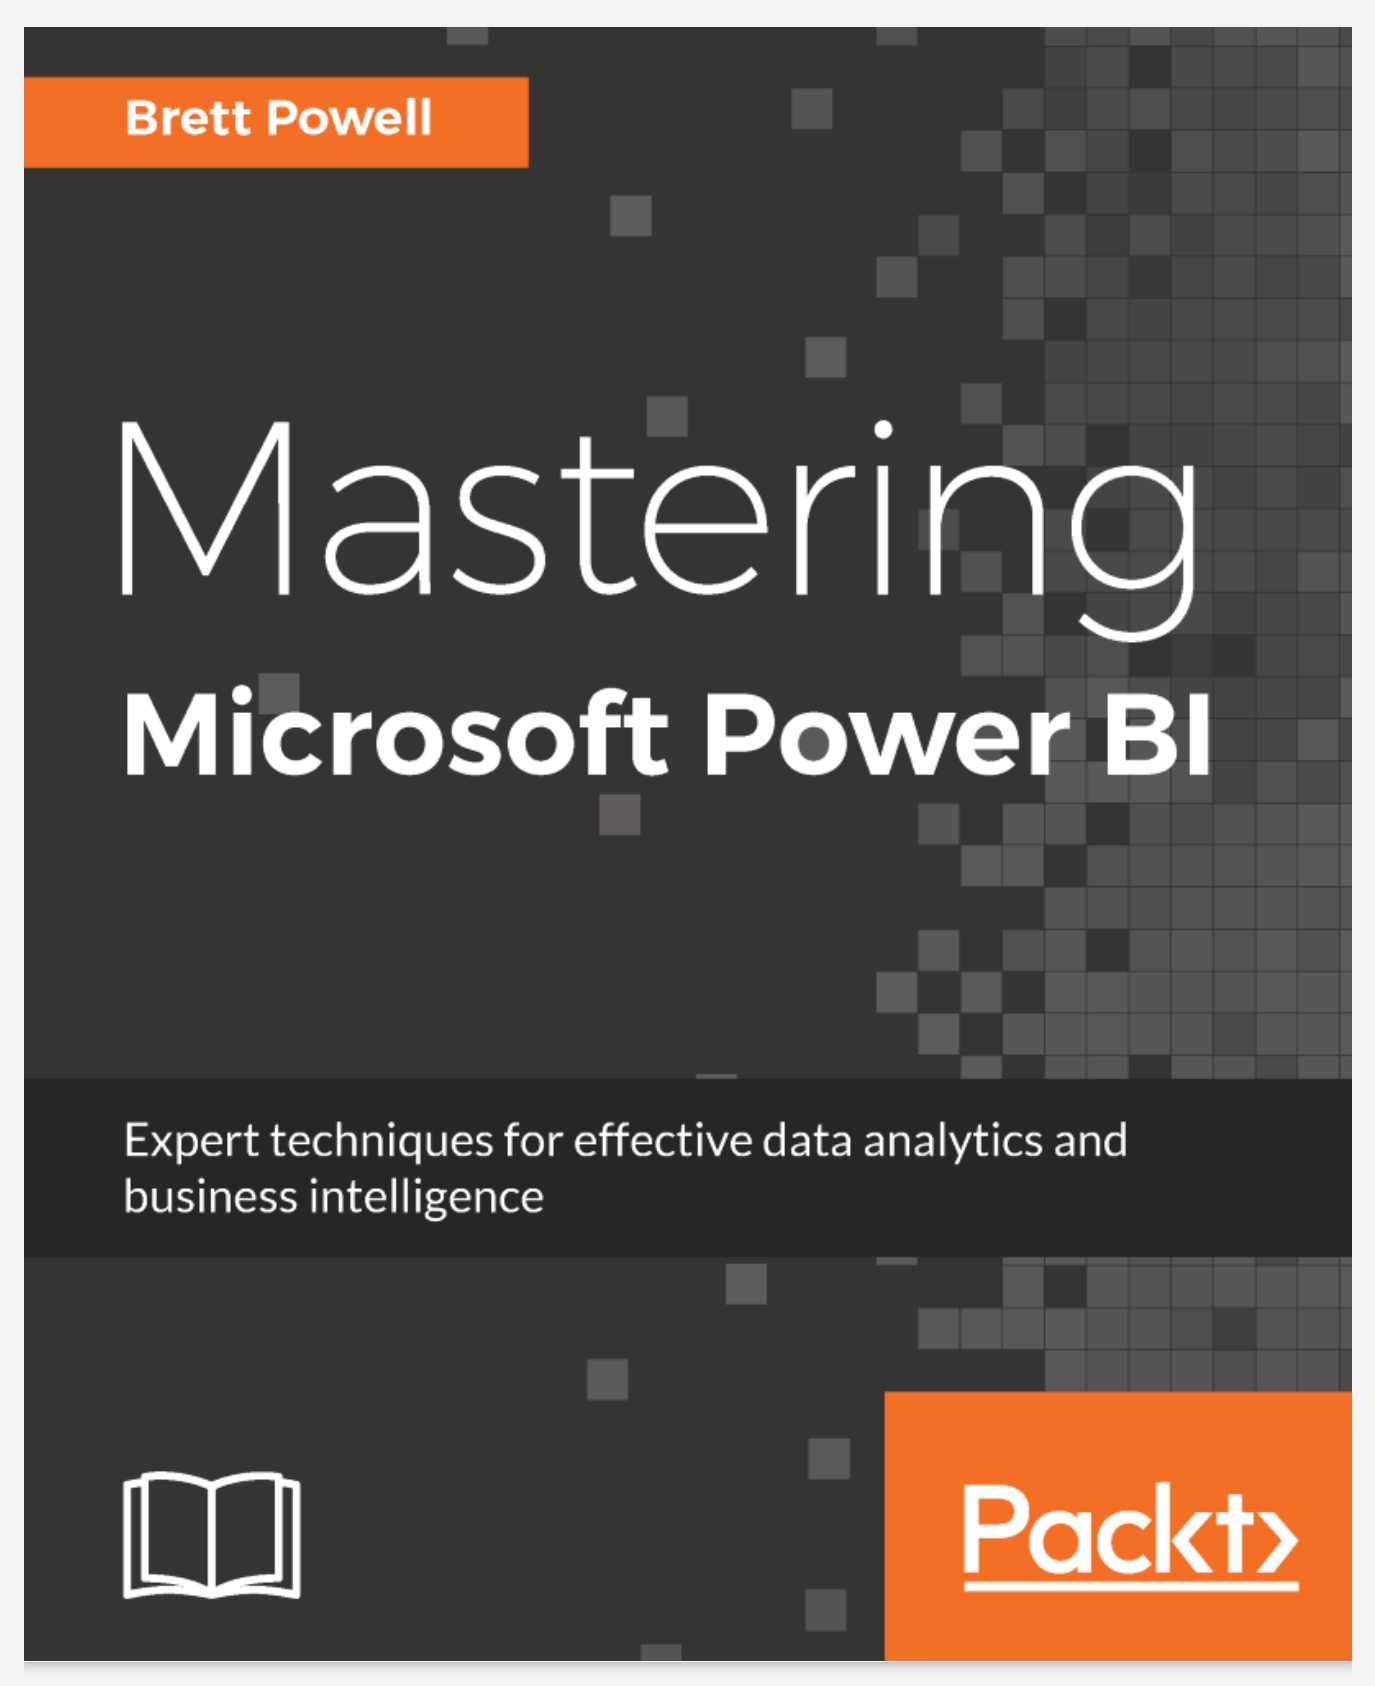 Mastering Microsoft Power BI: Expert techniques for effective data analytics and business intelligence PDF 2022